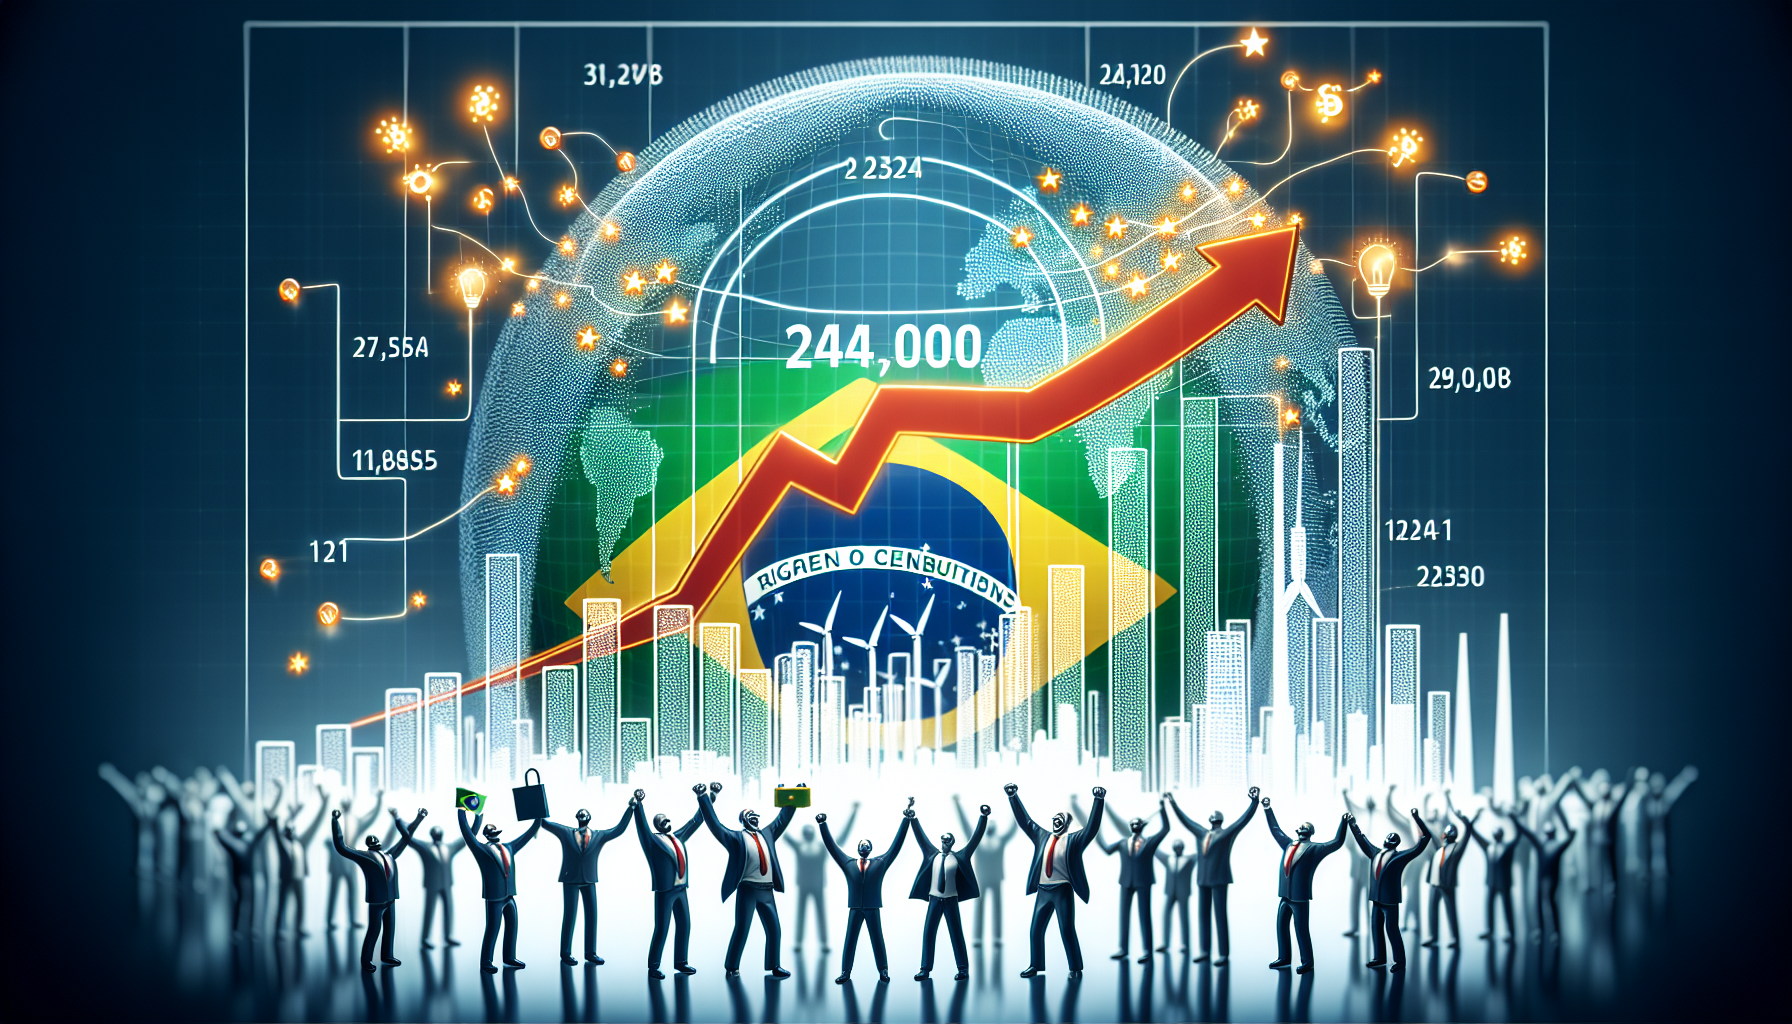 Employment Boom in Brazil: Over 240,000 New Jobs Created, Marking the Biggest Surge in 2024!